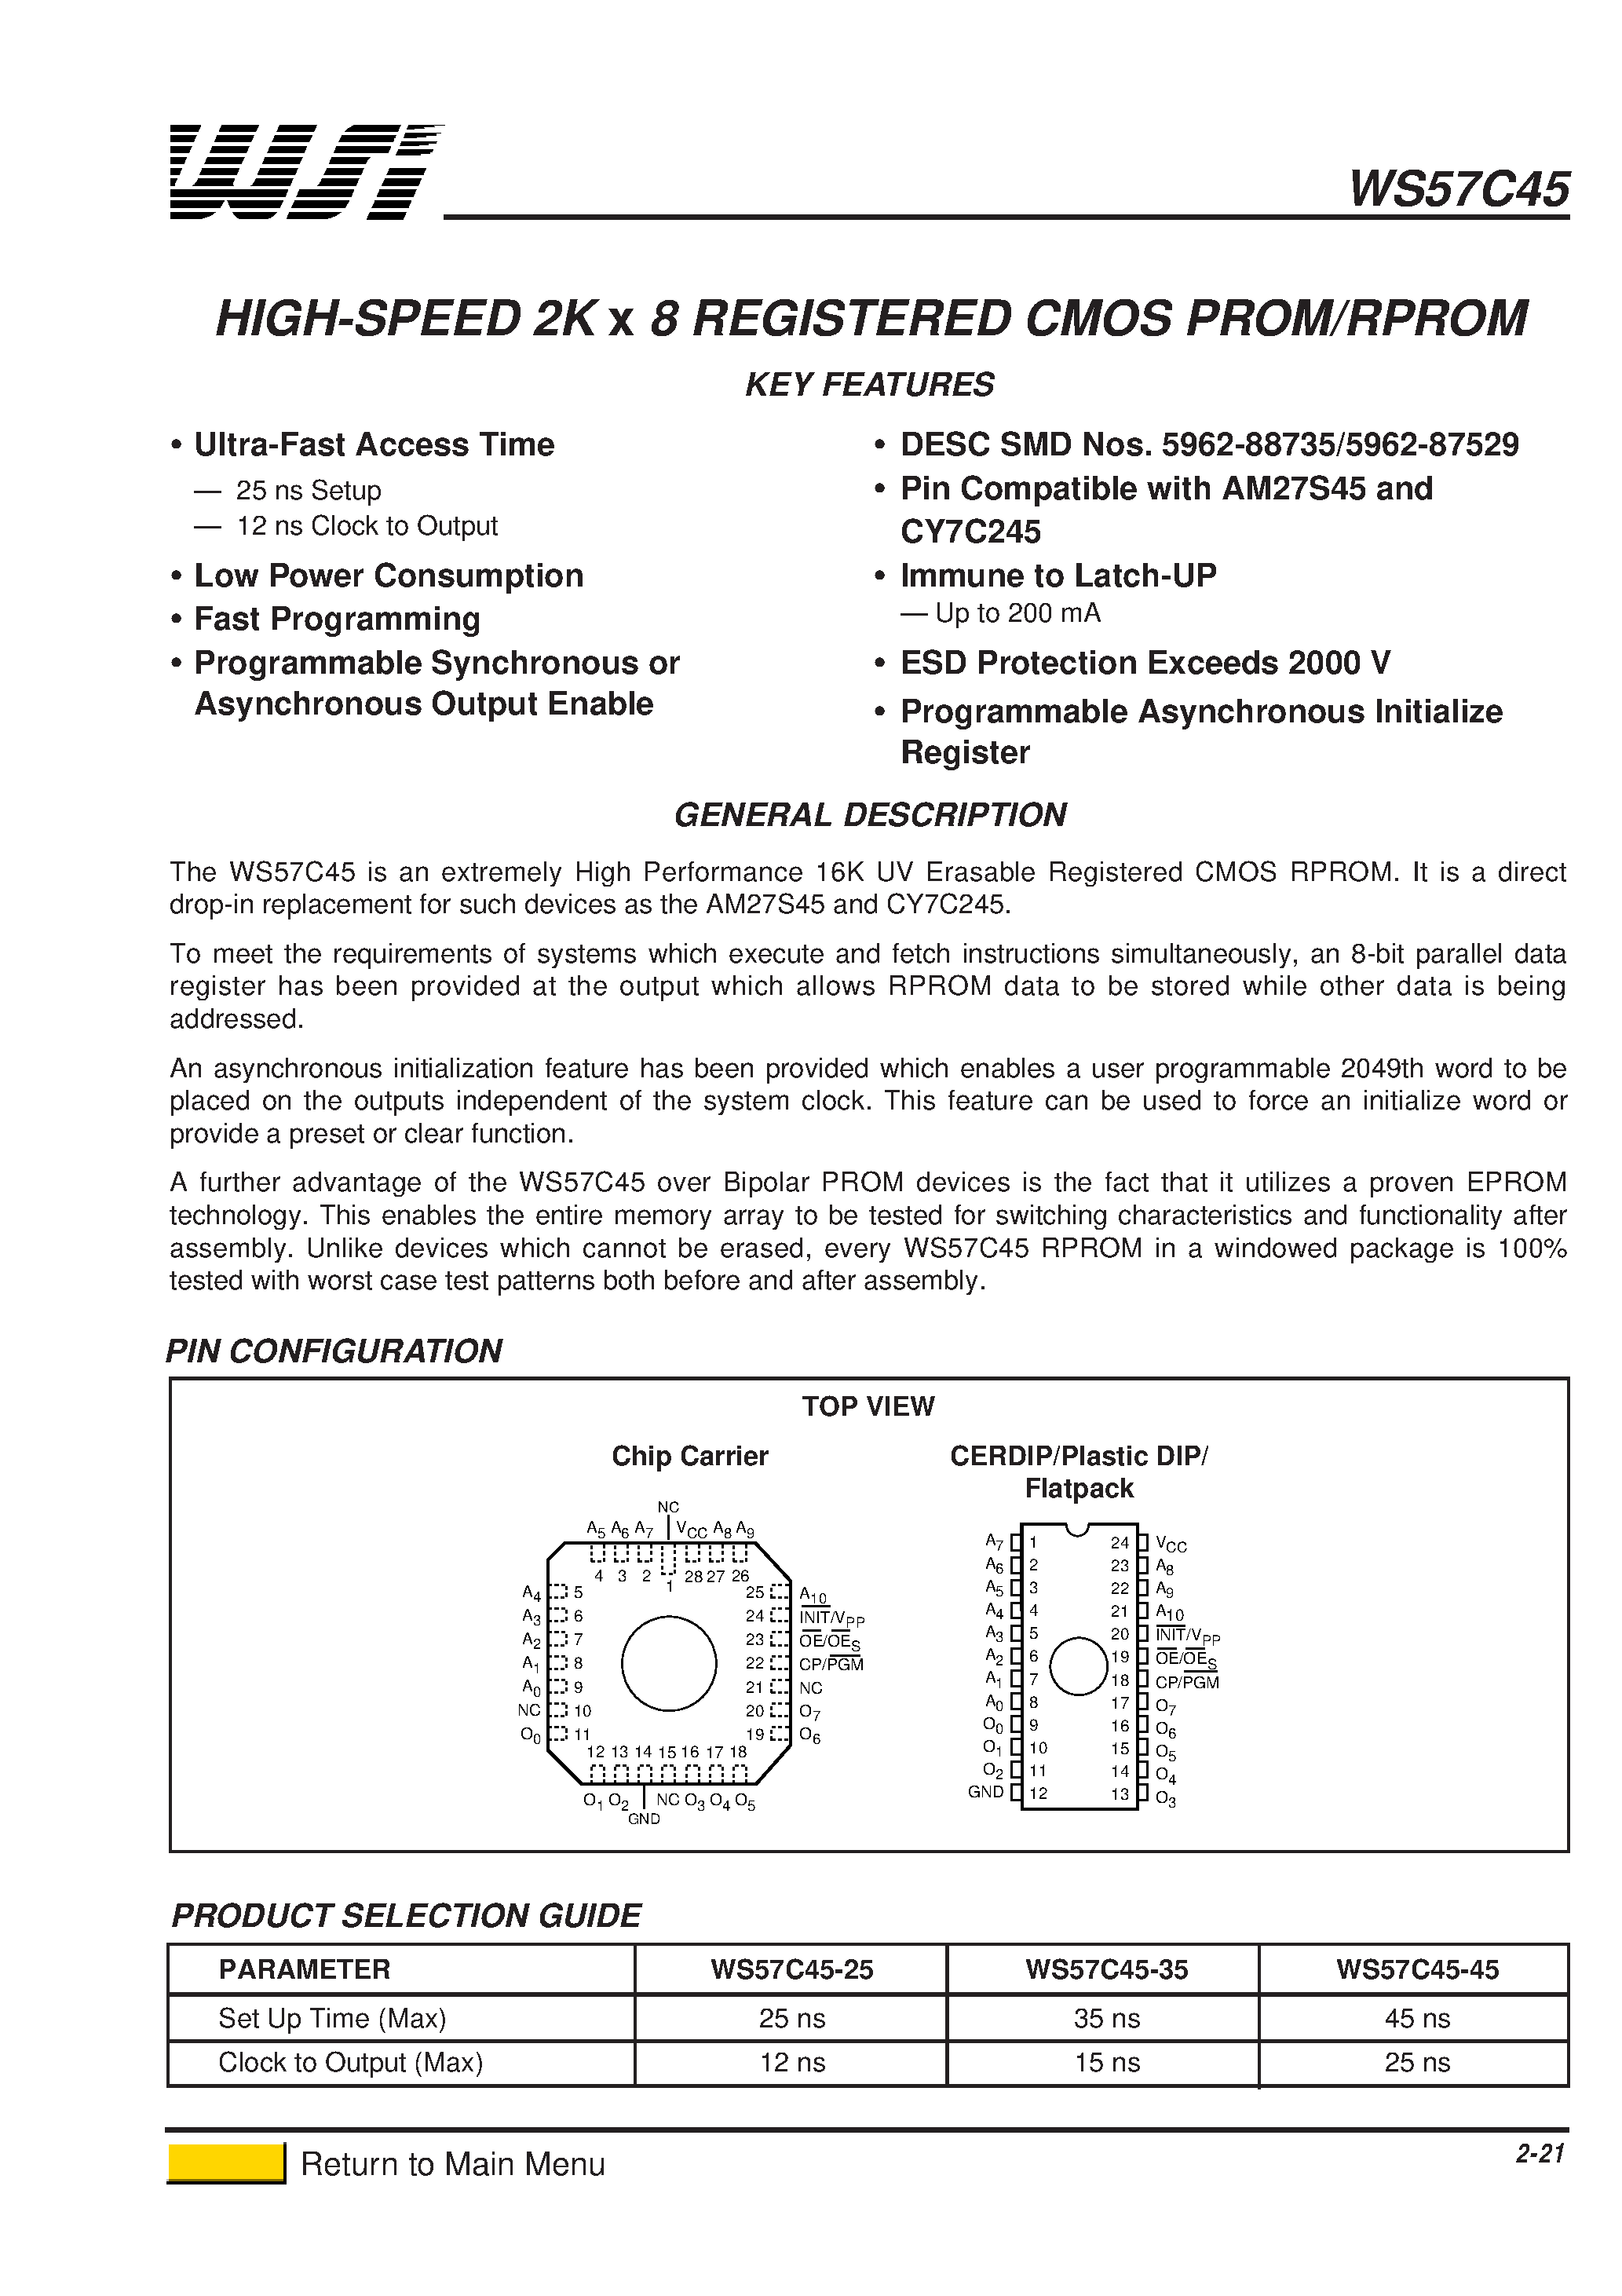 Datasheet WS57C45-25T - HIGH-SPEED 2K x 8 REGISTERED CMOS PROM/RPROM page 1